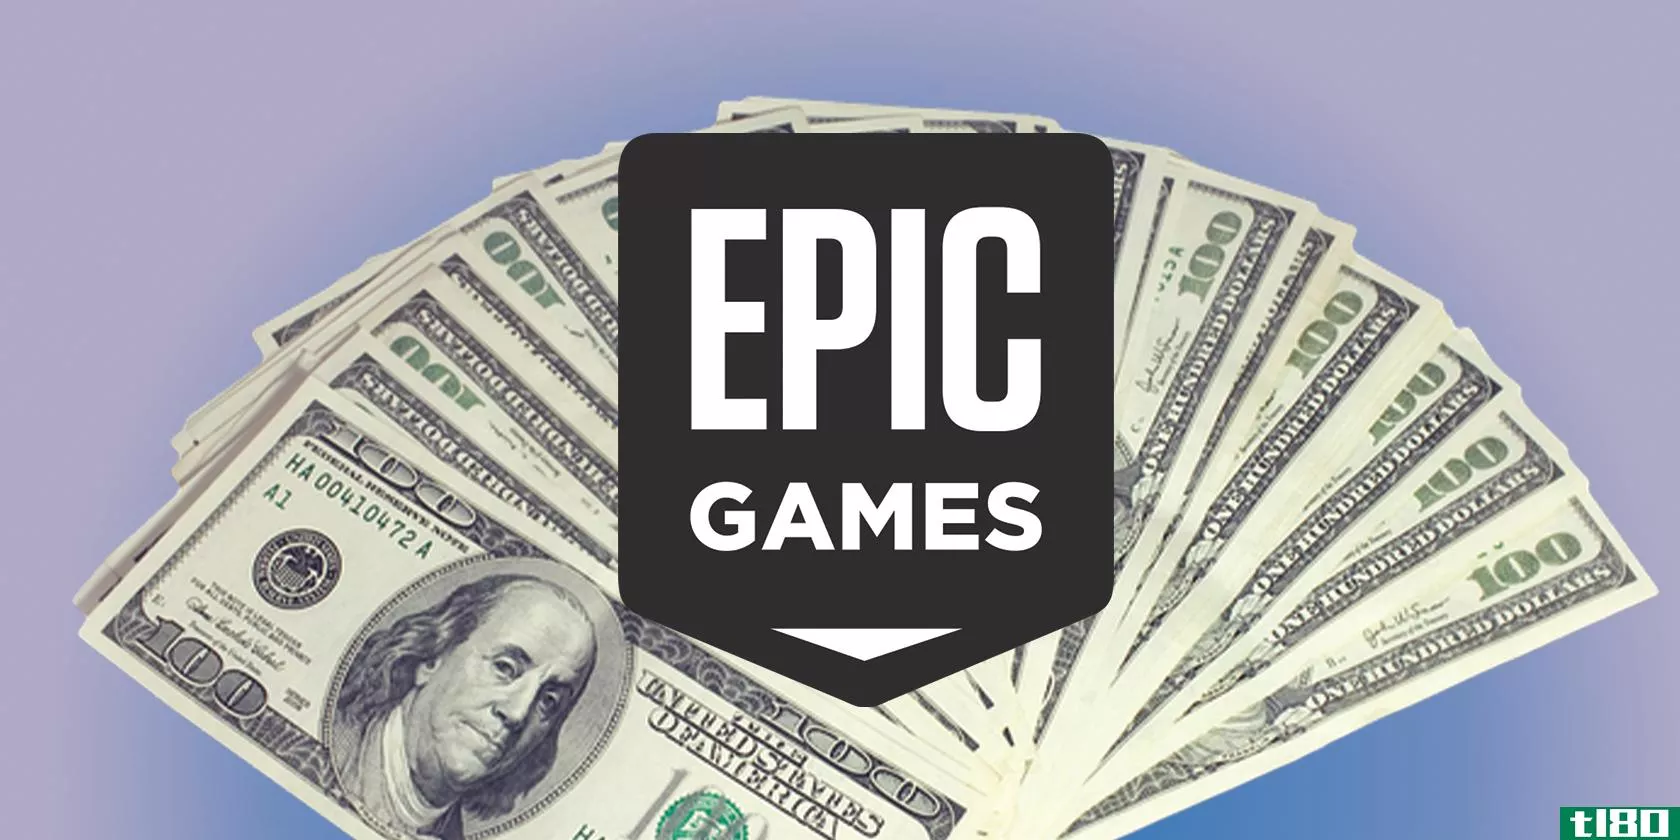 epic games logo and a handful of 100 dollar bills